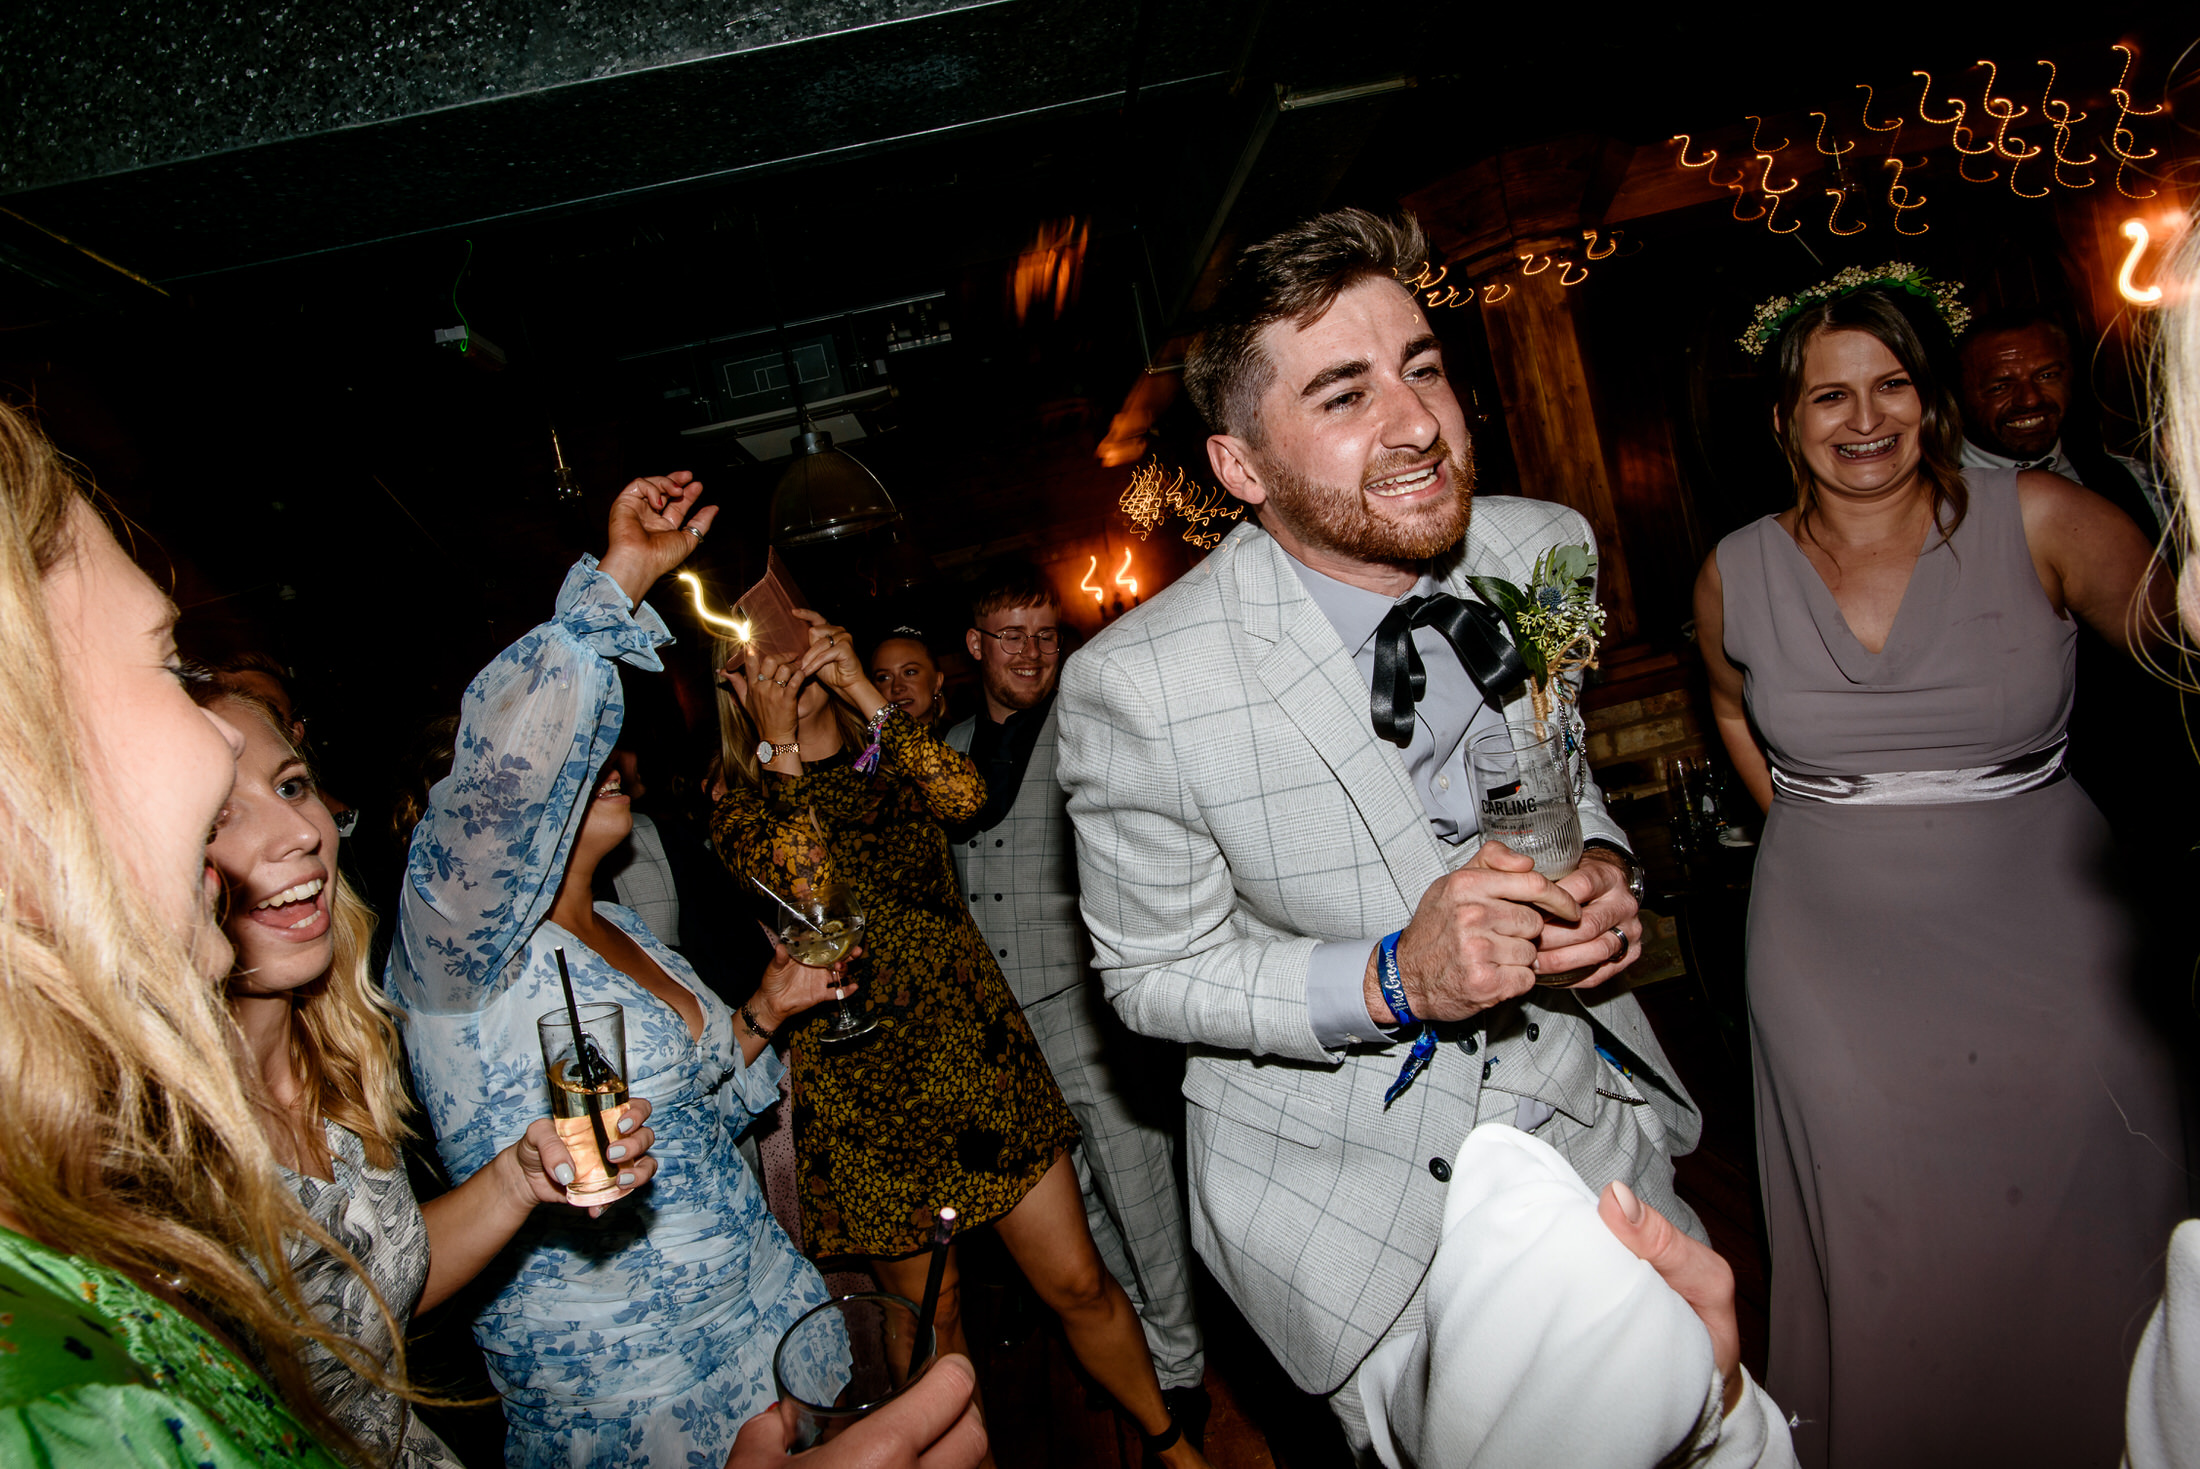 A man in a suit is gracefully holding a glass of wine at a wedding.